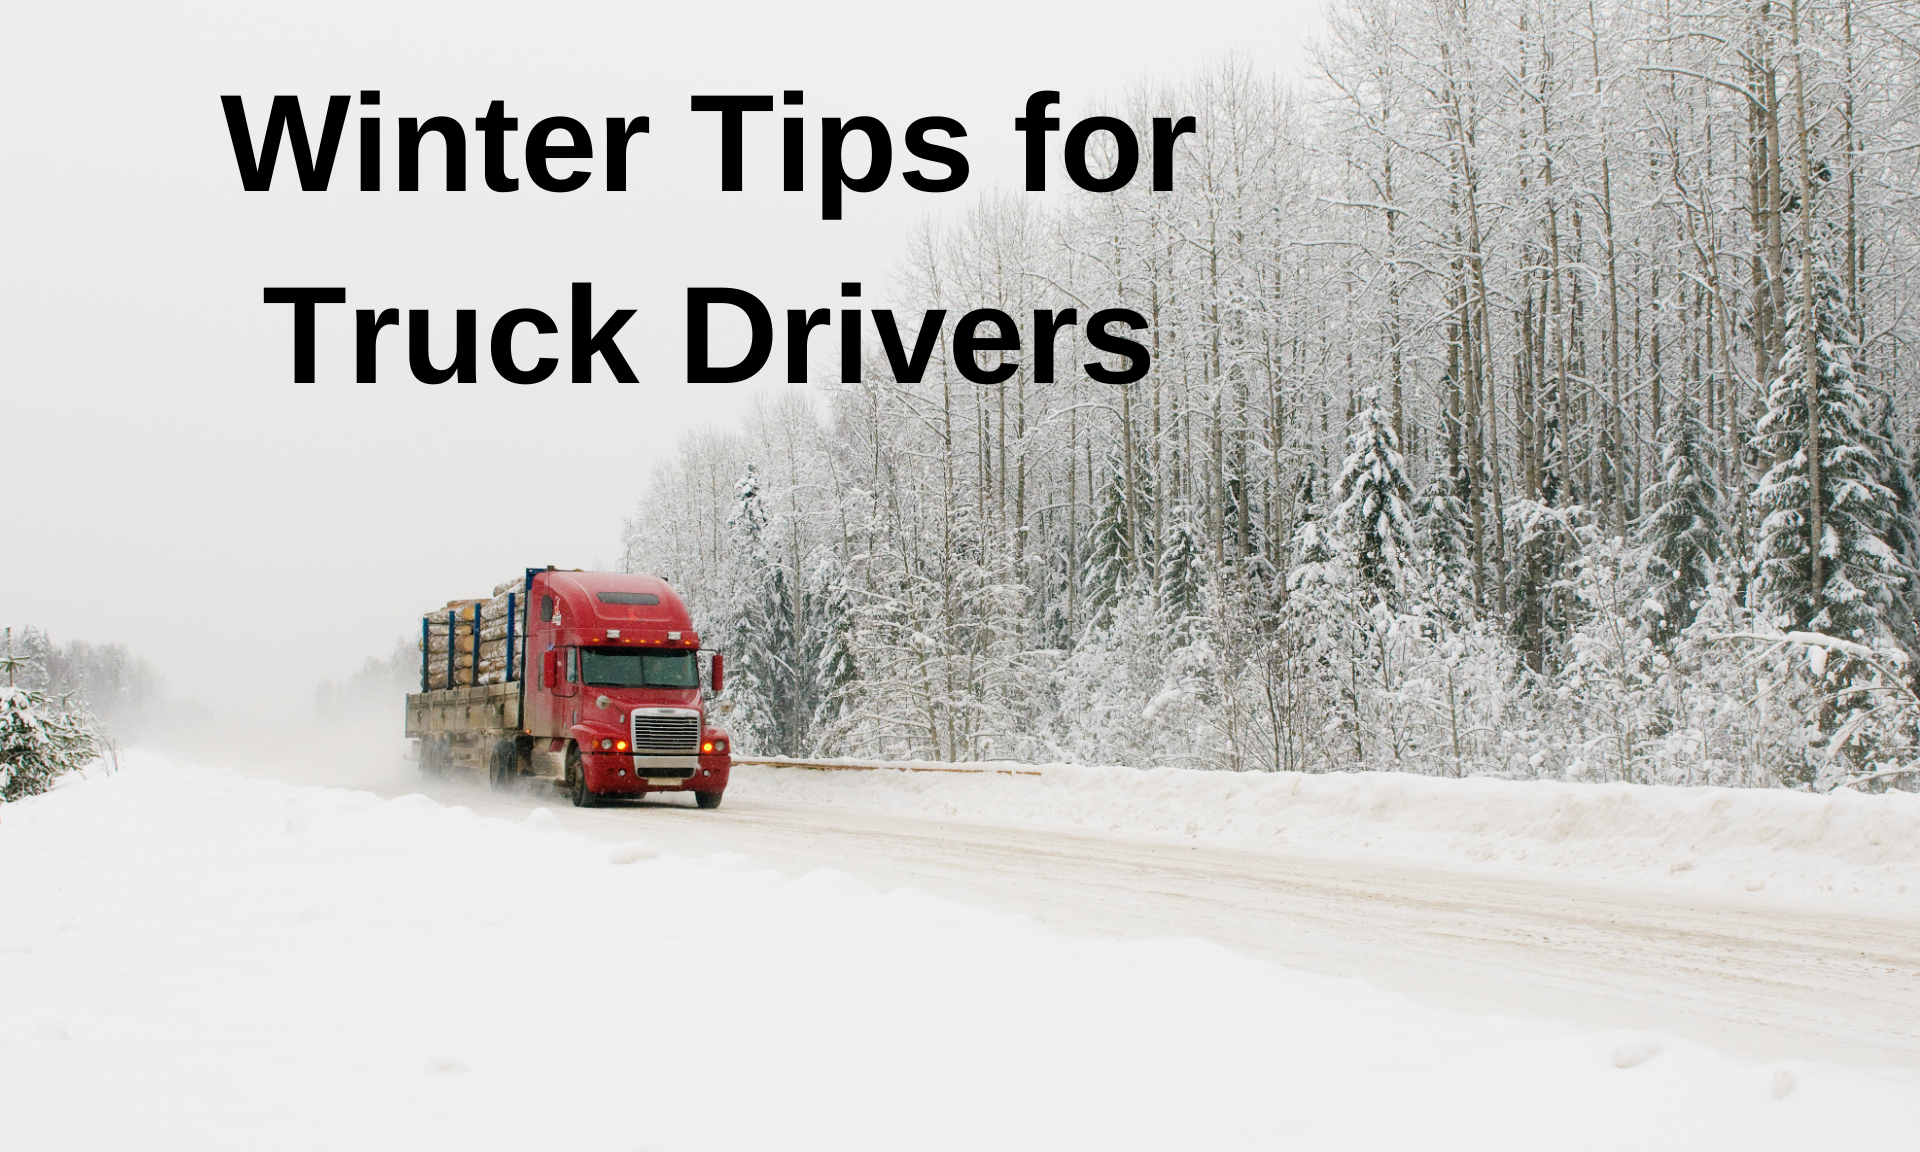 https://www.truckingpartners.com/wp-content/uploads/2020/07/Winter-Tips-for-Truck-Drivers-1920x1152-1.png